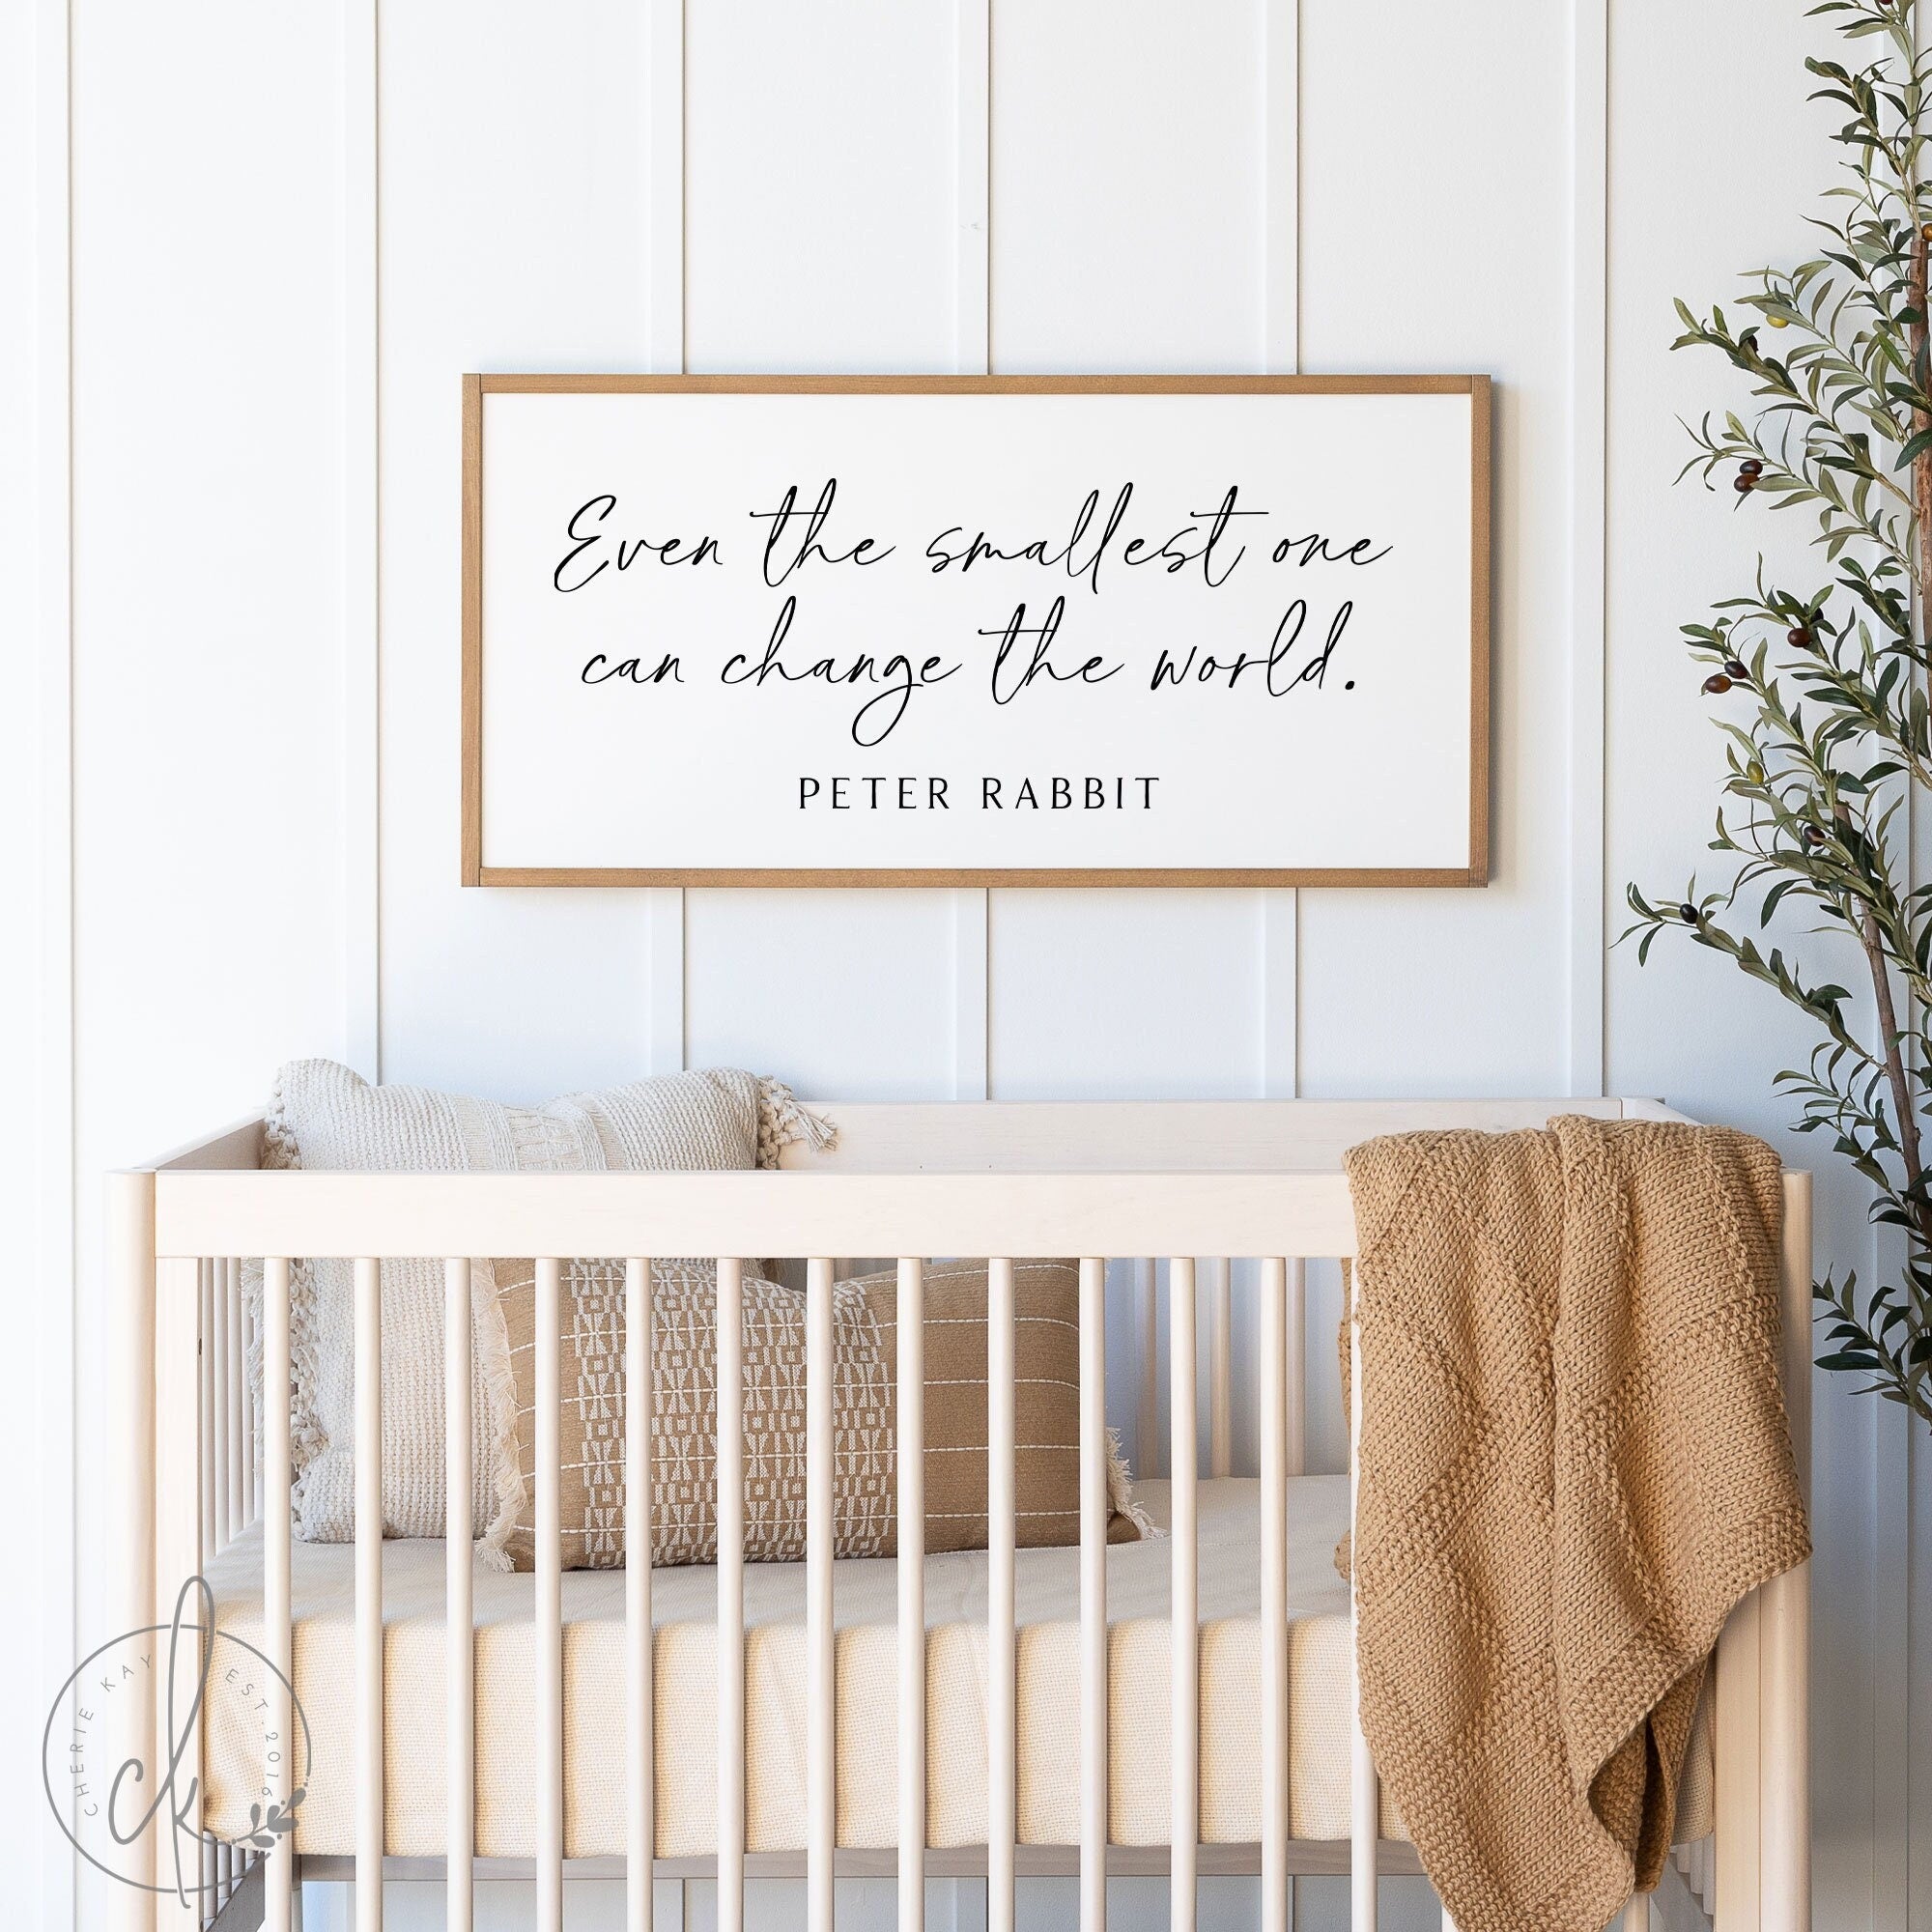 Even The Smallest One Can Change The World | Framed Wall Art | Nursery Wall Decor | Nursery Quotes | Kids Room Wall Decor